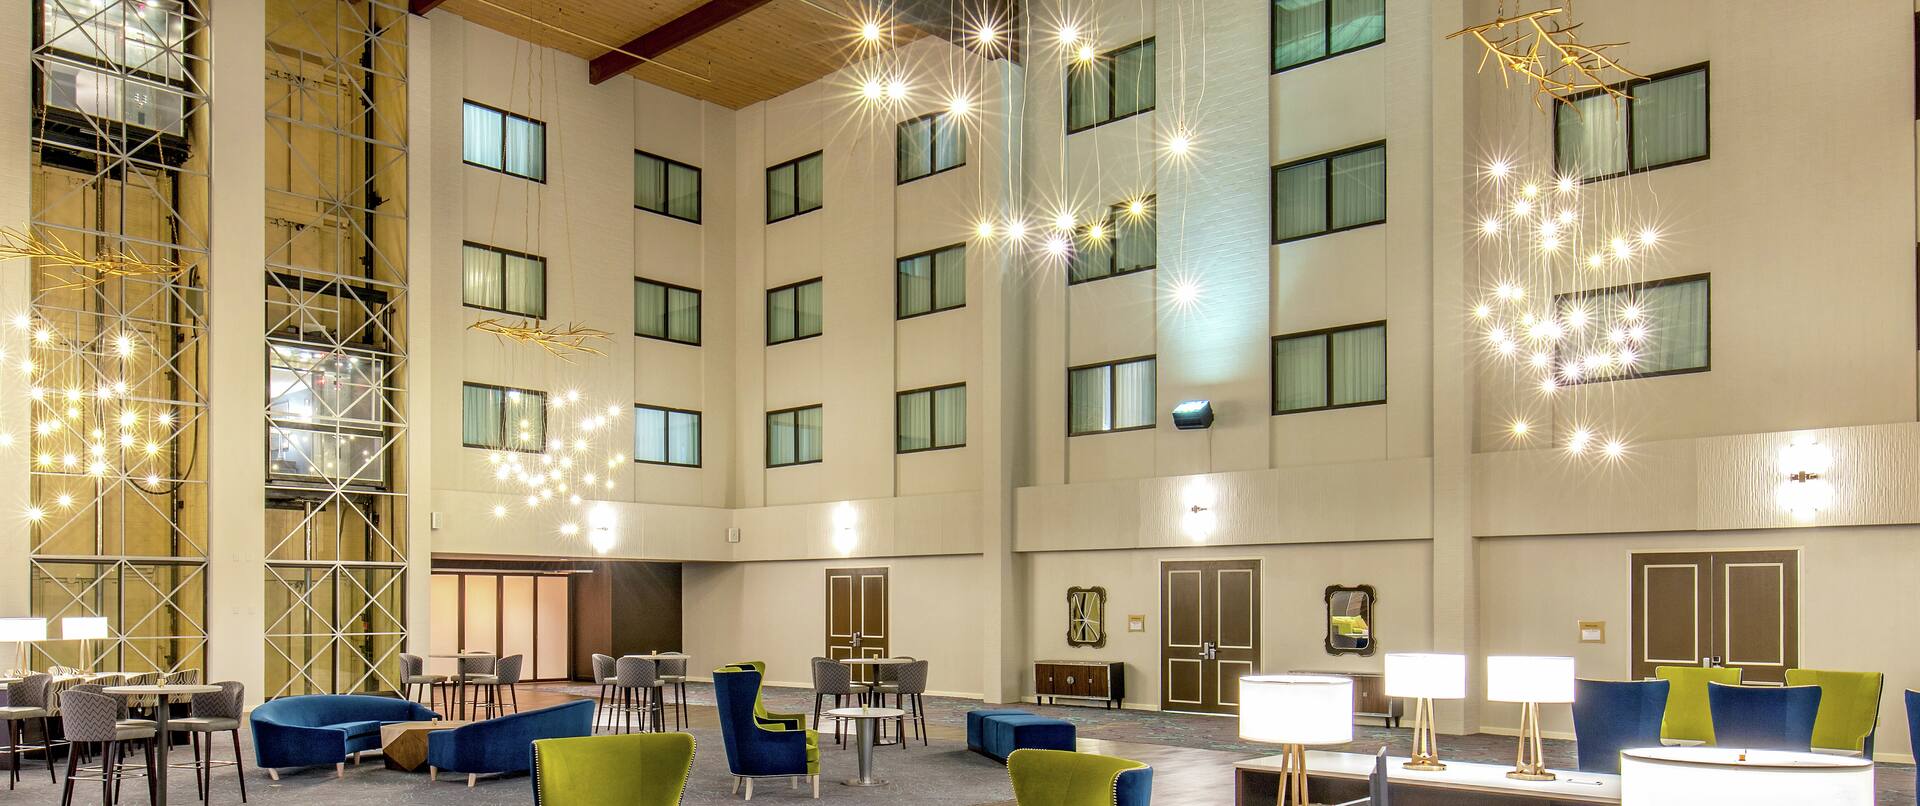 Our Lobby Atrium is Perfect for Time with Friends